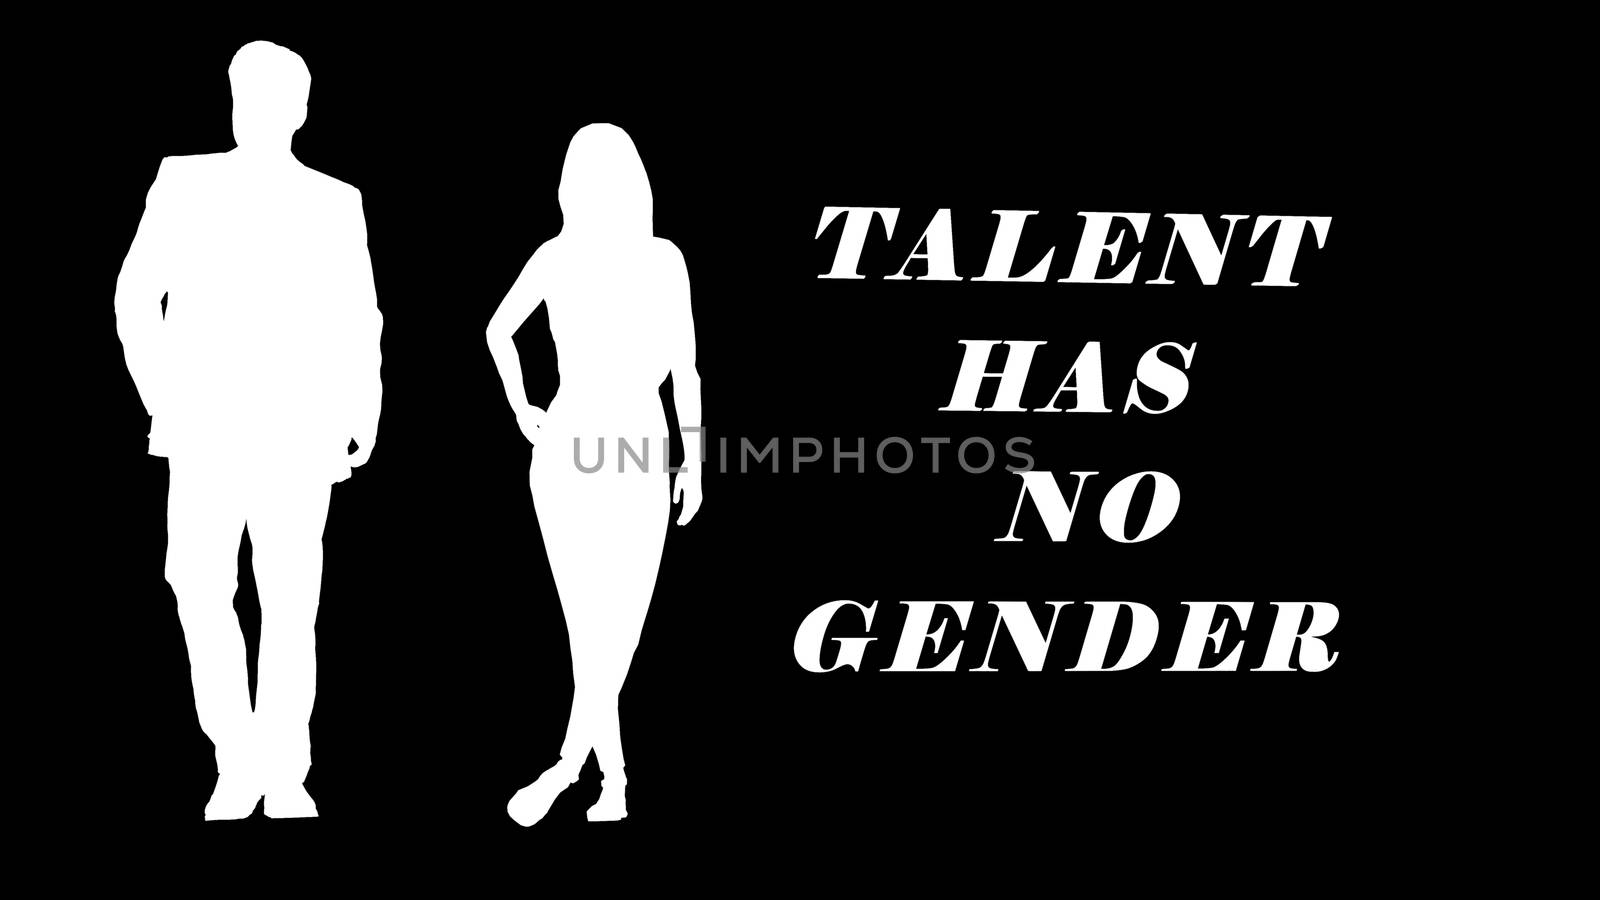 Here is no gender for talent , ability.